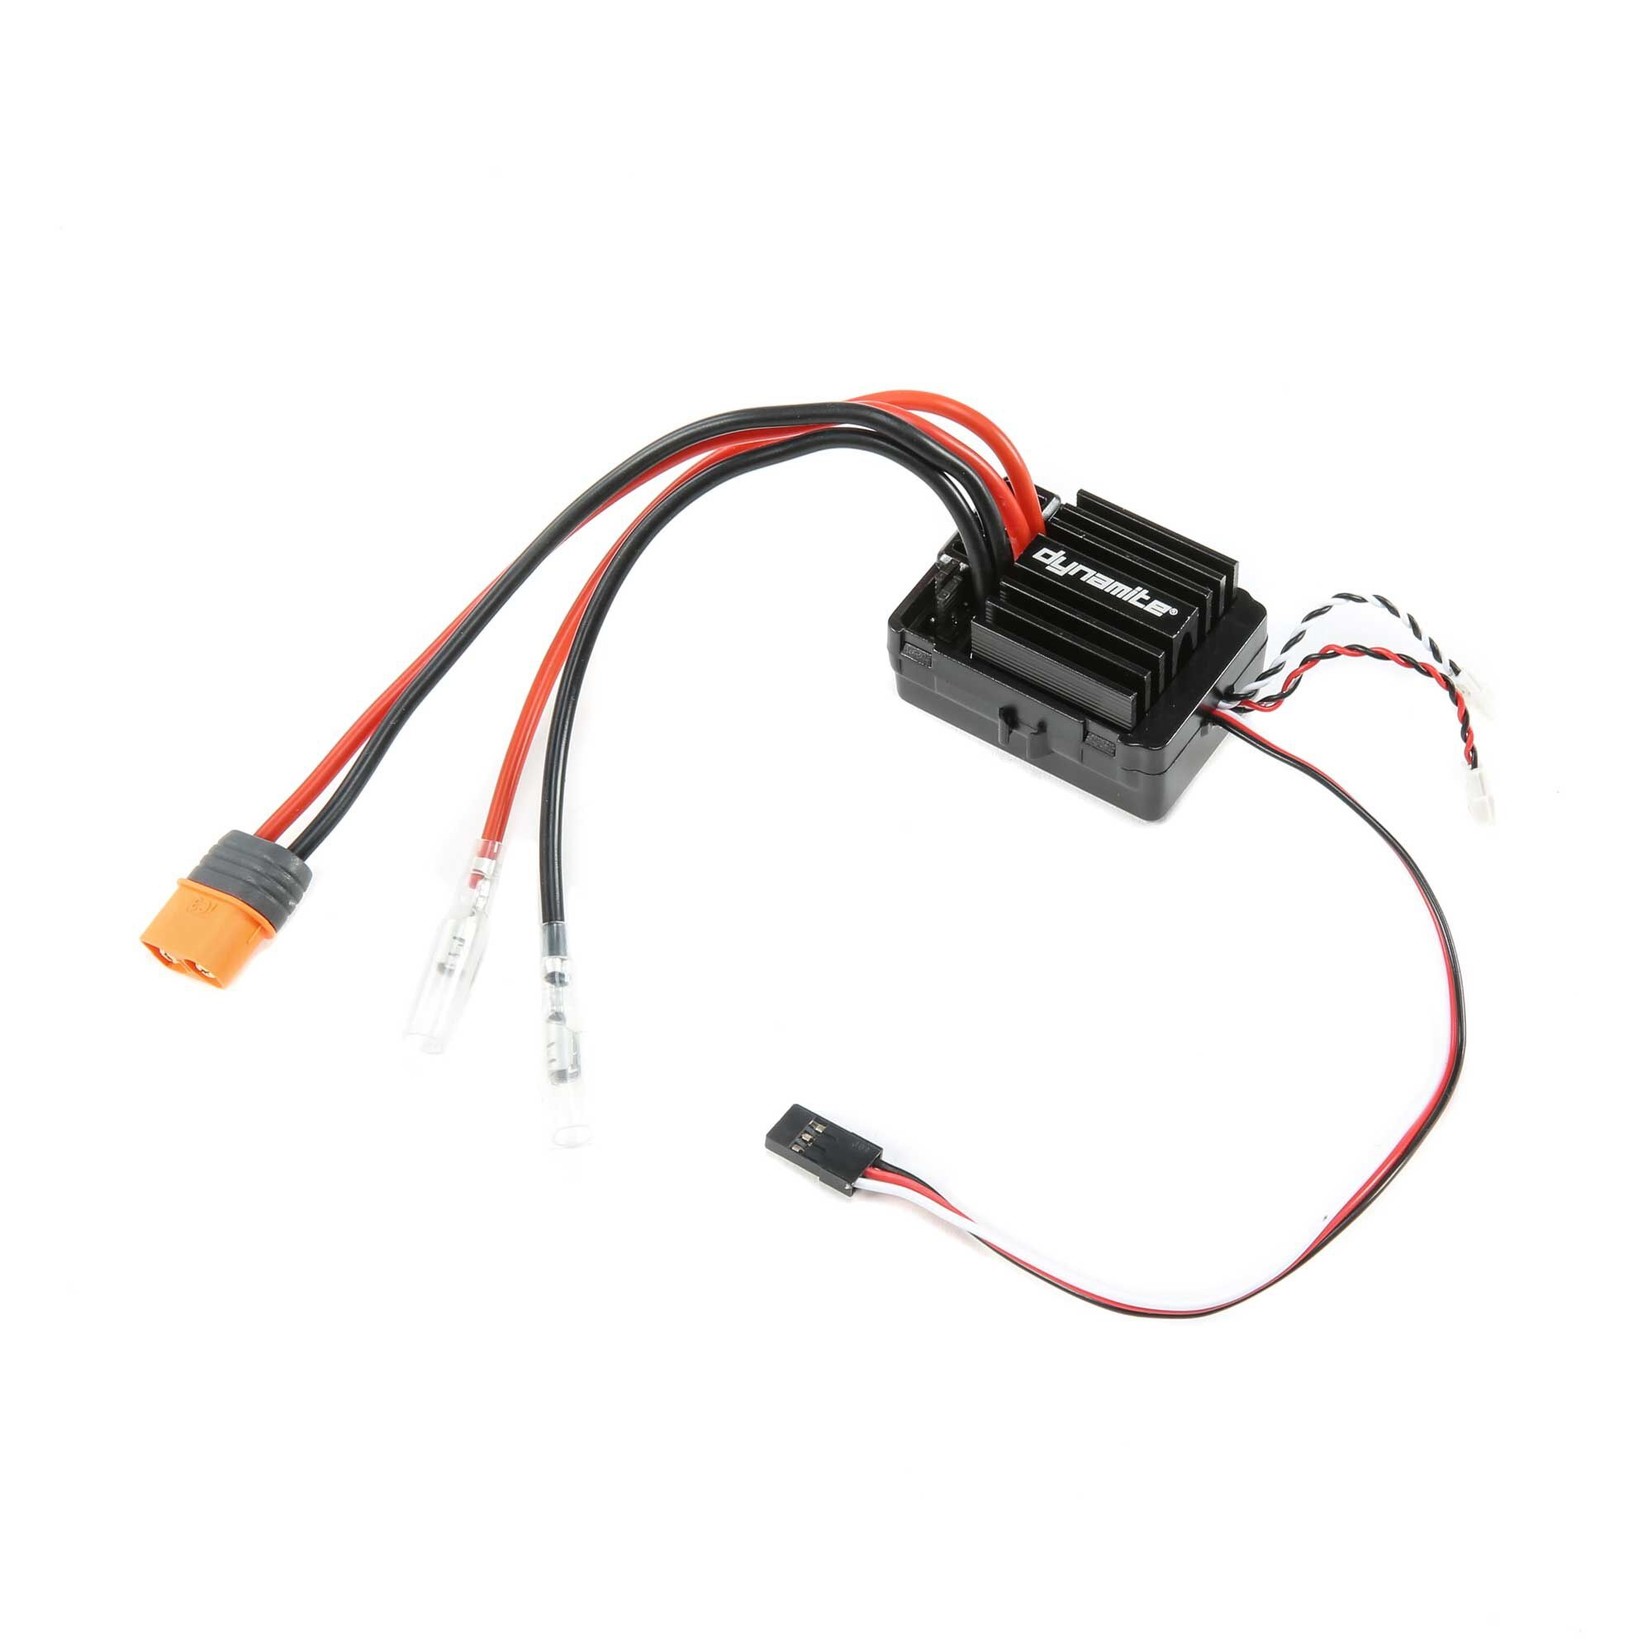 Dynamite RC Waterproof AE-5L Brushed ESC with LED Port Light and IC3